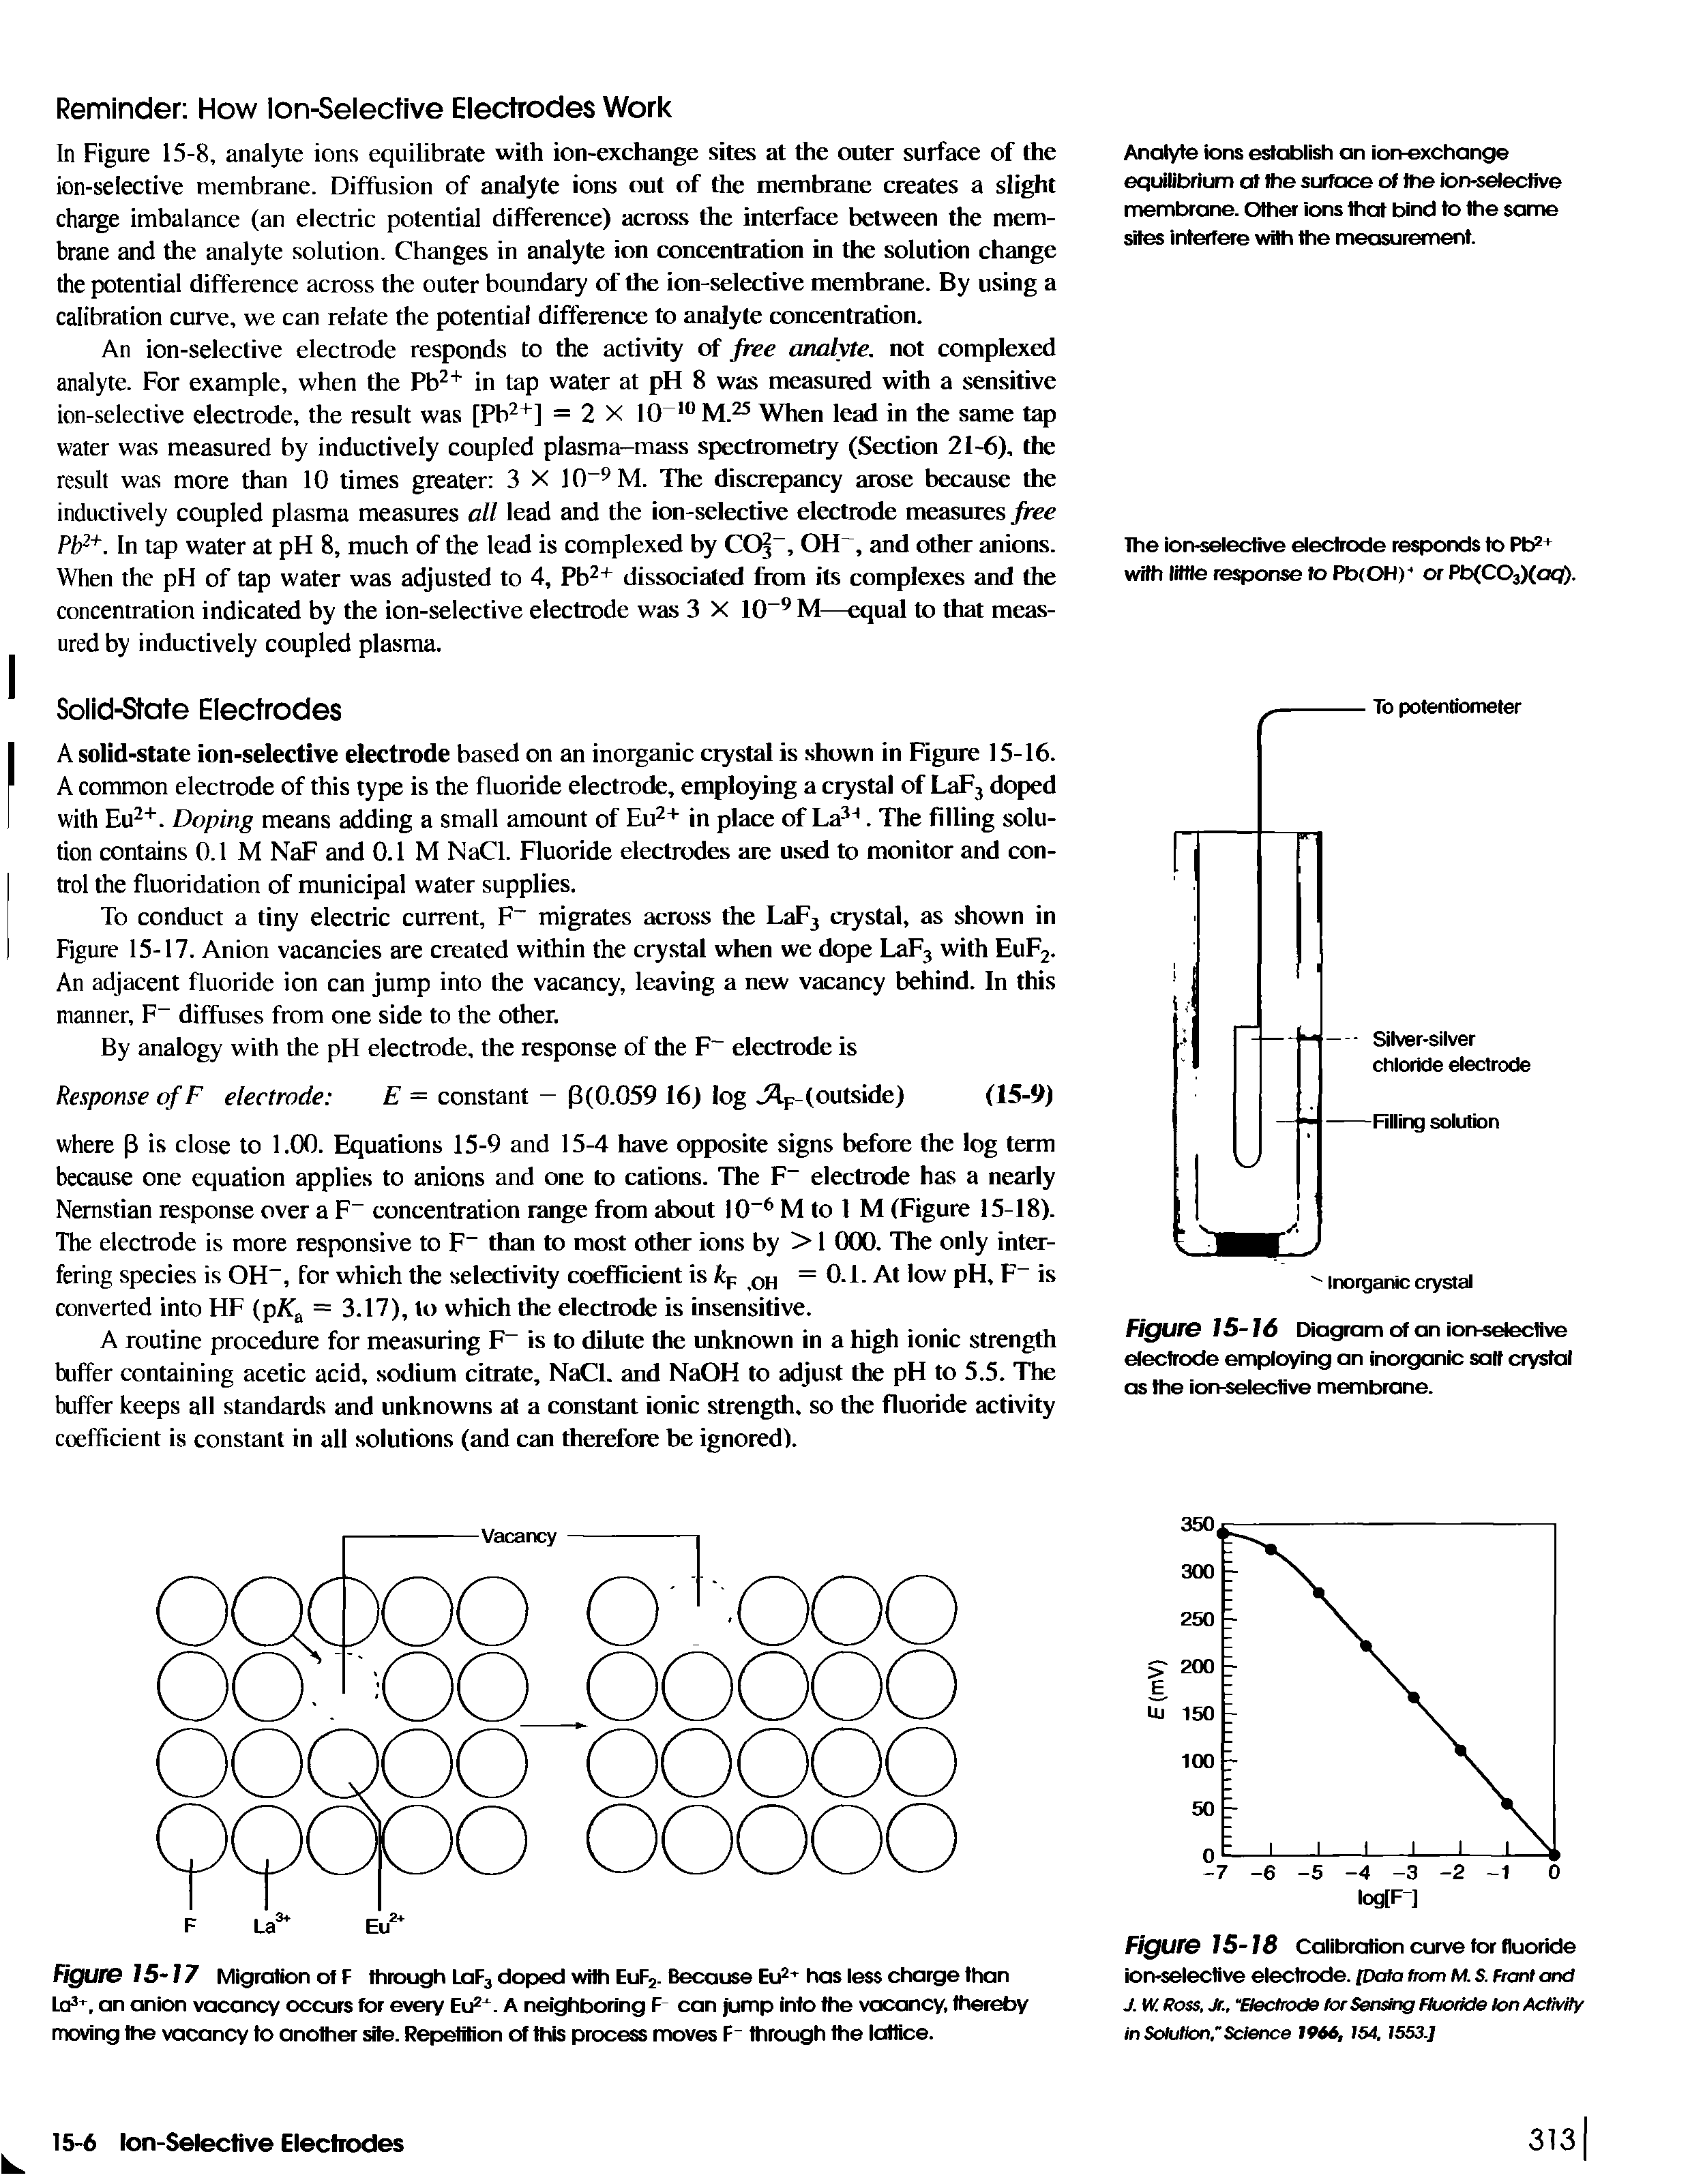 Figure 15-18 Calibration curve for fluoride ion-selective electrode. [Data from M. S. Front and J. W. Ross, Jr., Electrode tor Sensing Fluoride Ion Activity in Solution," Science 1966, 154, 1553.]...